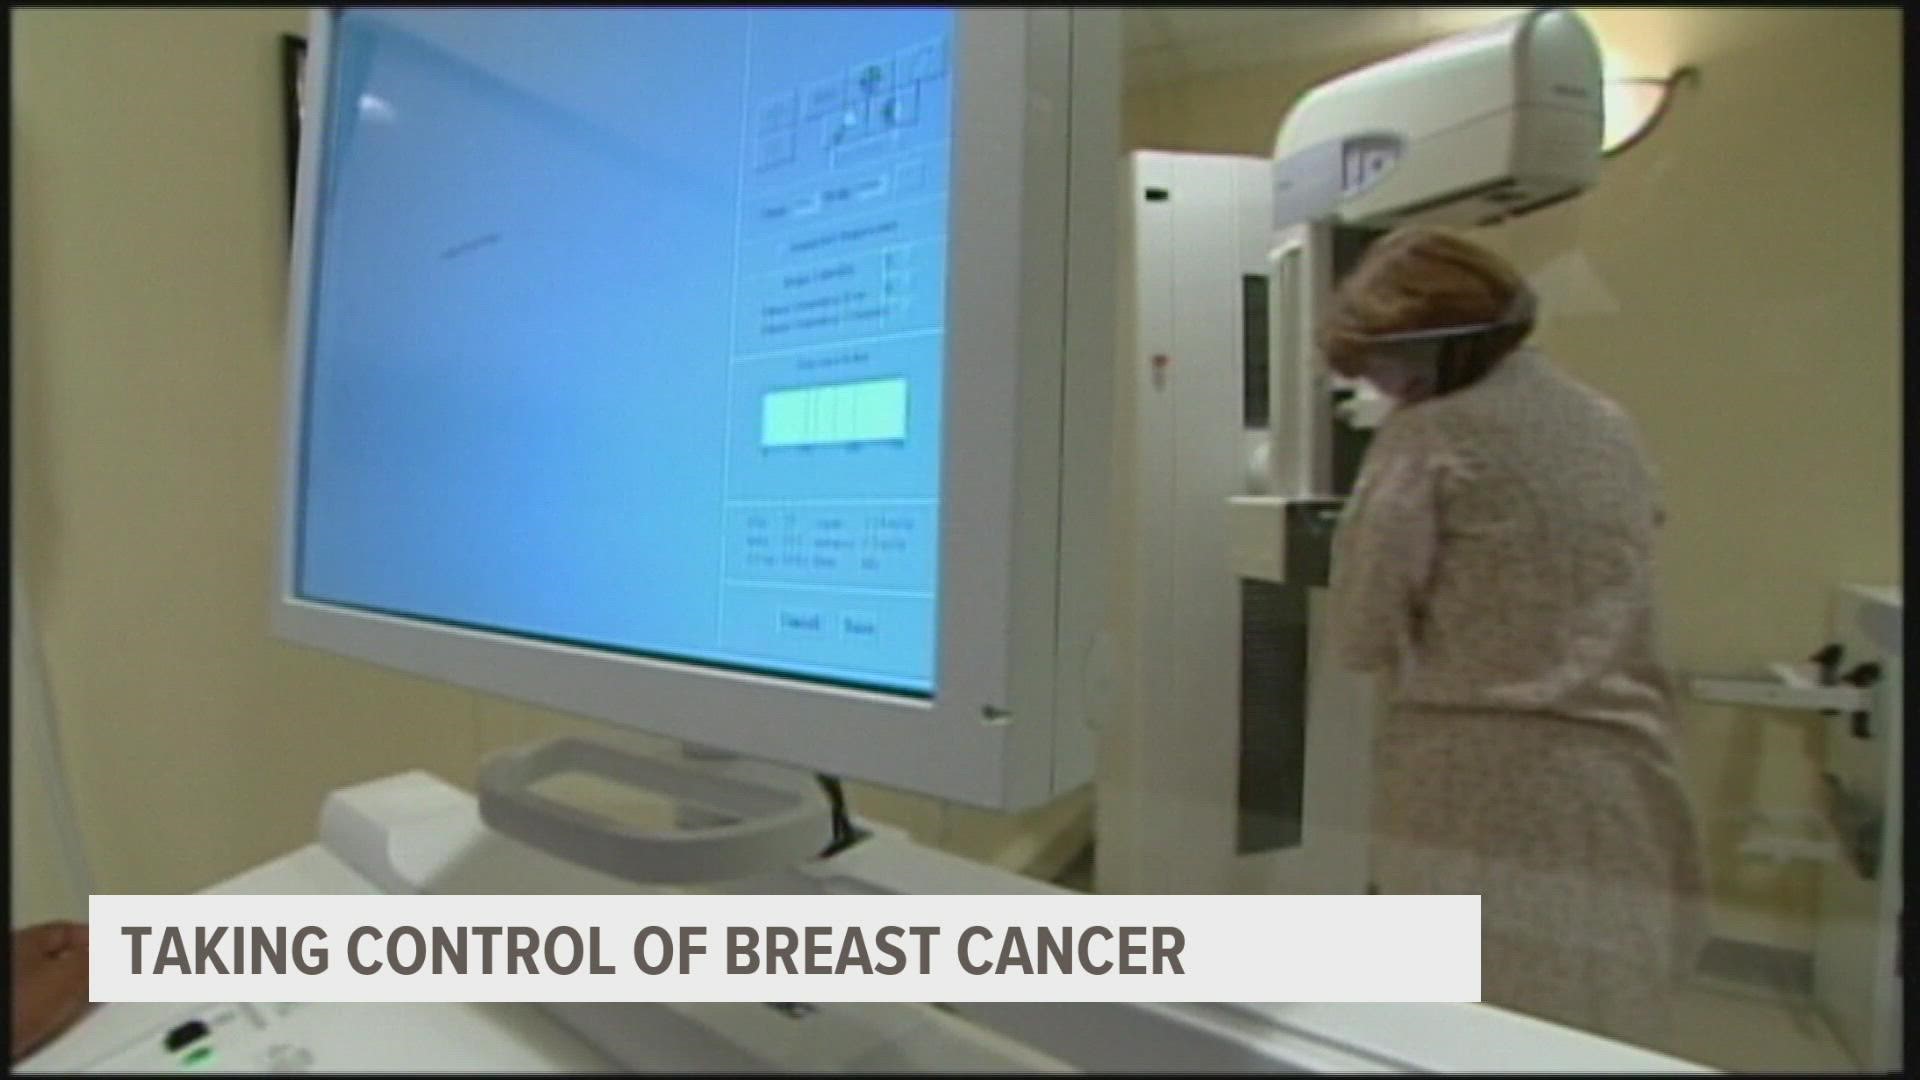 Carissa Meredith of Ankeny is urging others to get their mammograms in order to prevent a delayed breast cancer diagnosis.